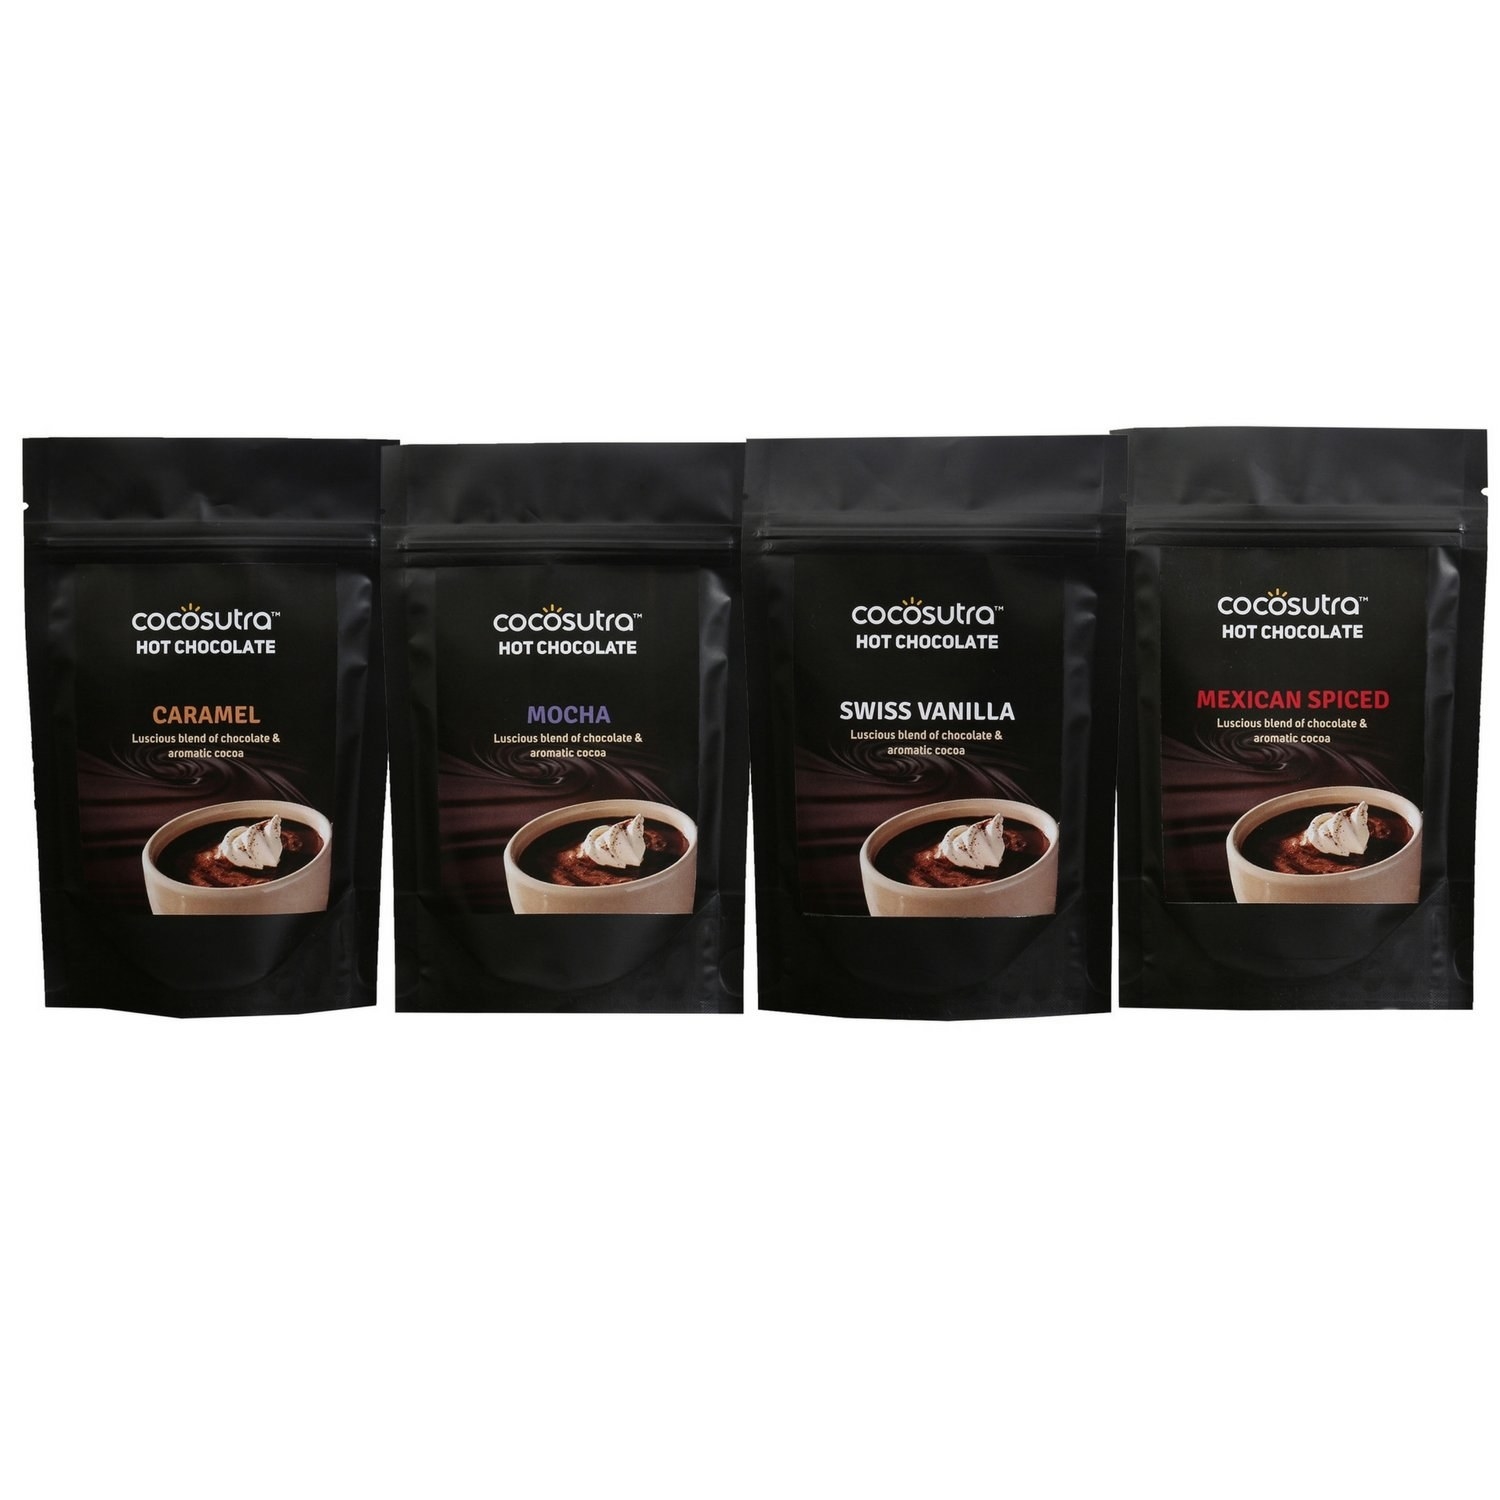 Set of hot chocolate blends flavoured Caramel, Mocha, Swiss Vanilla and Mexican Spiced.